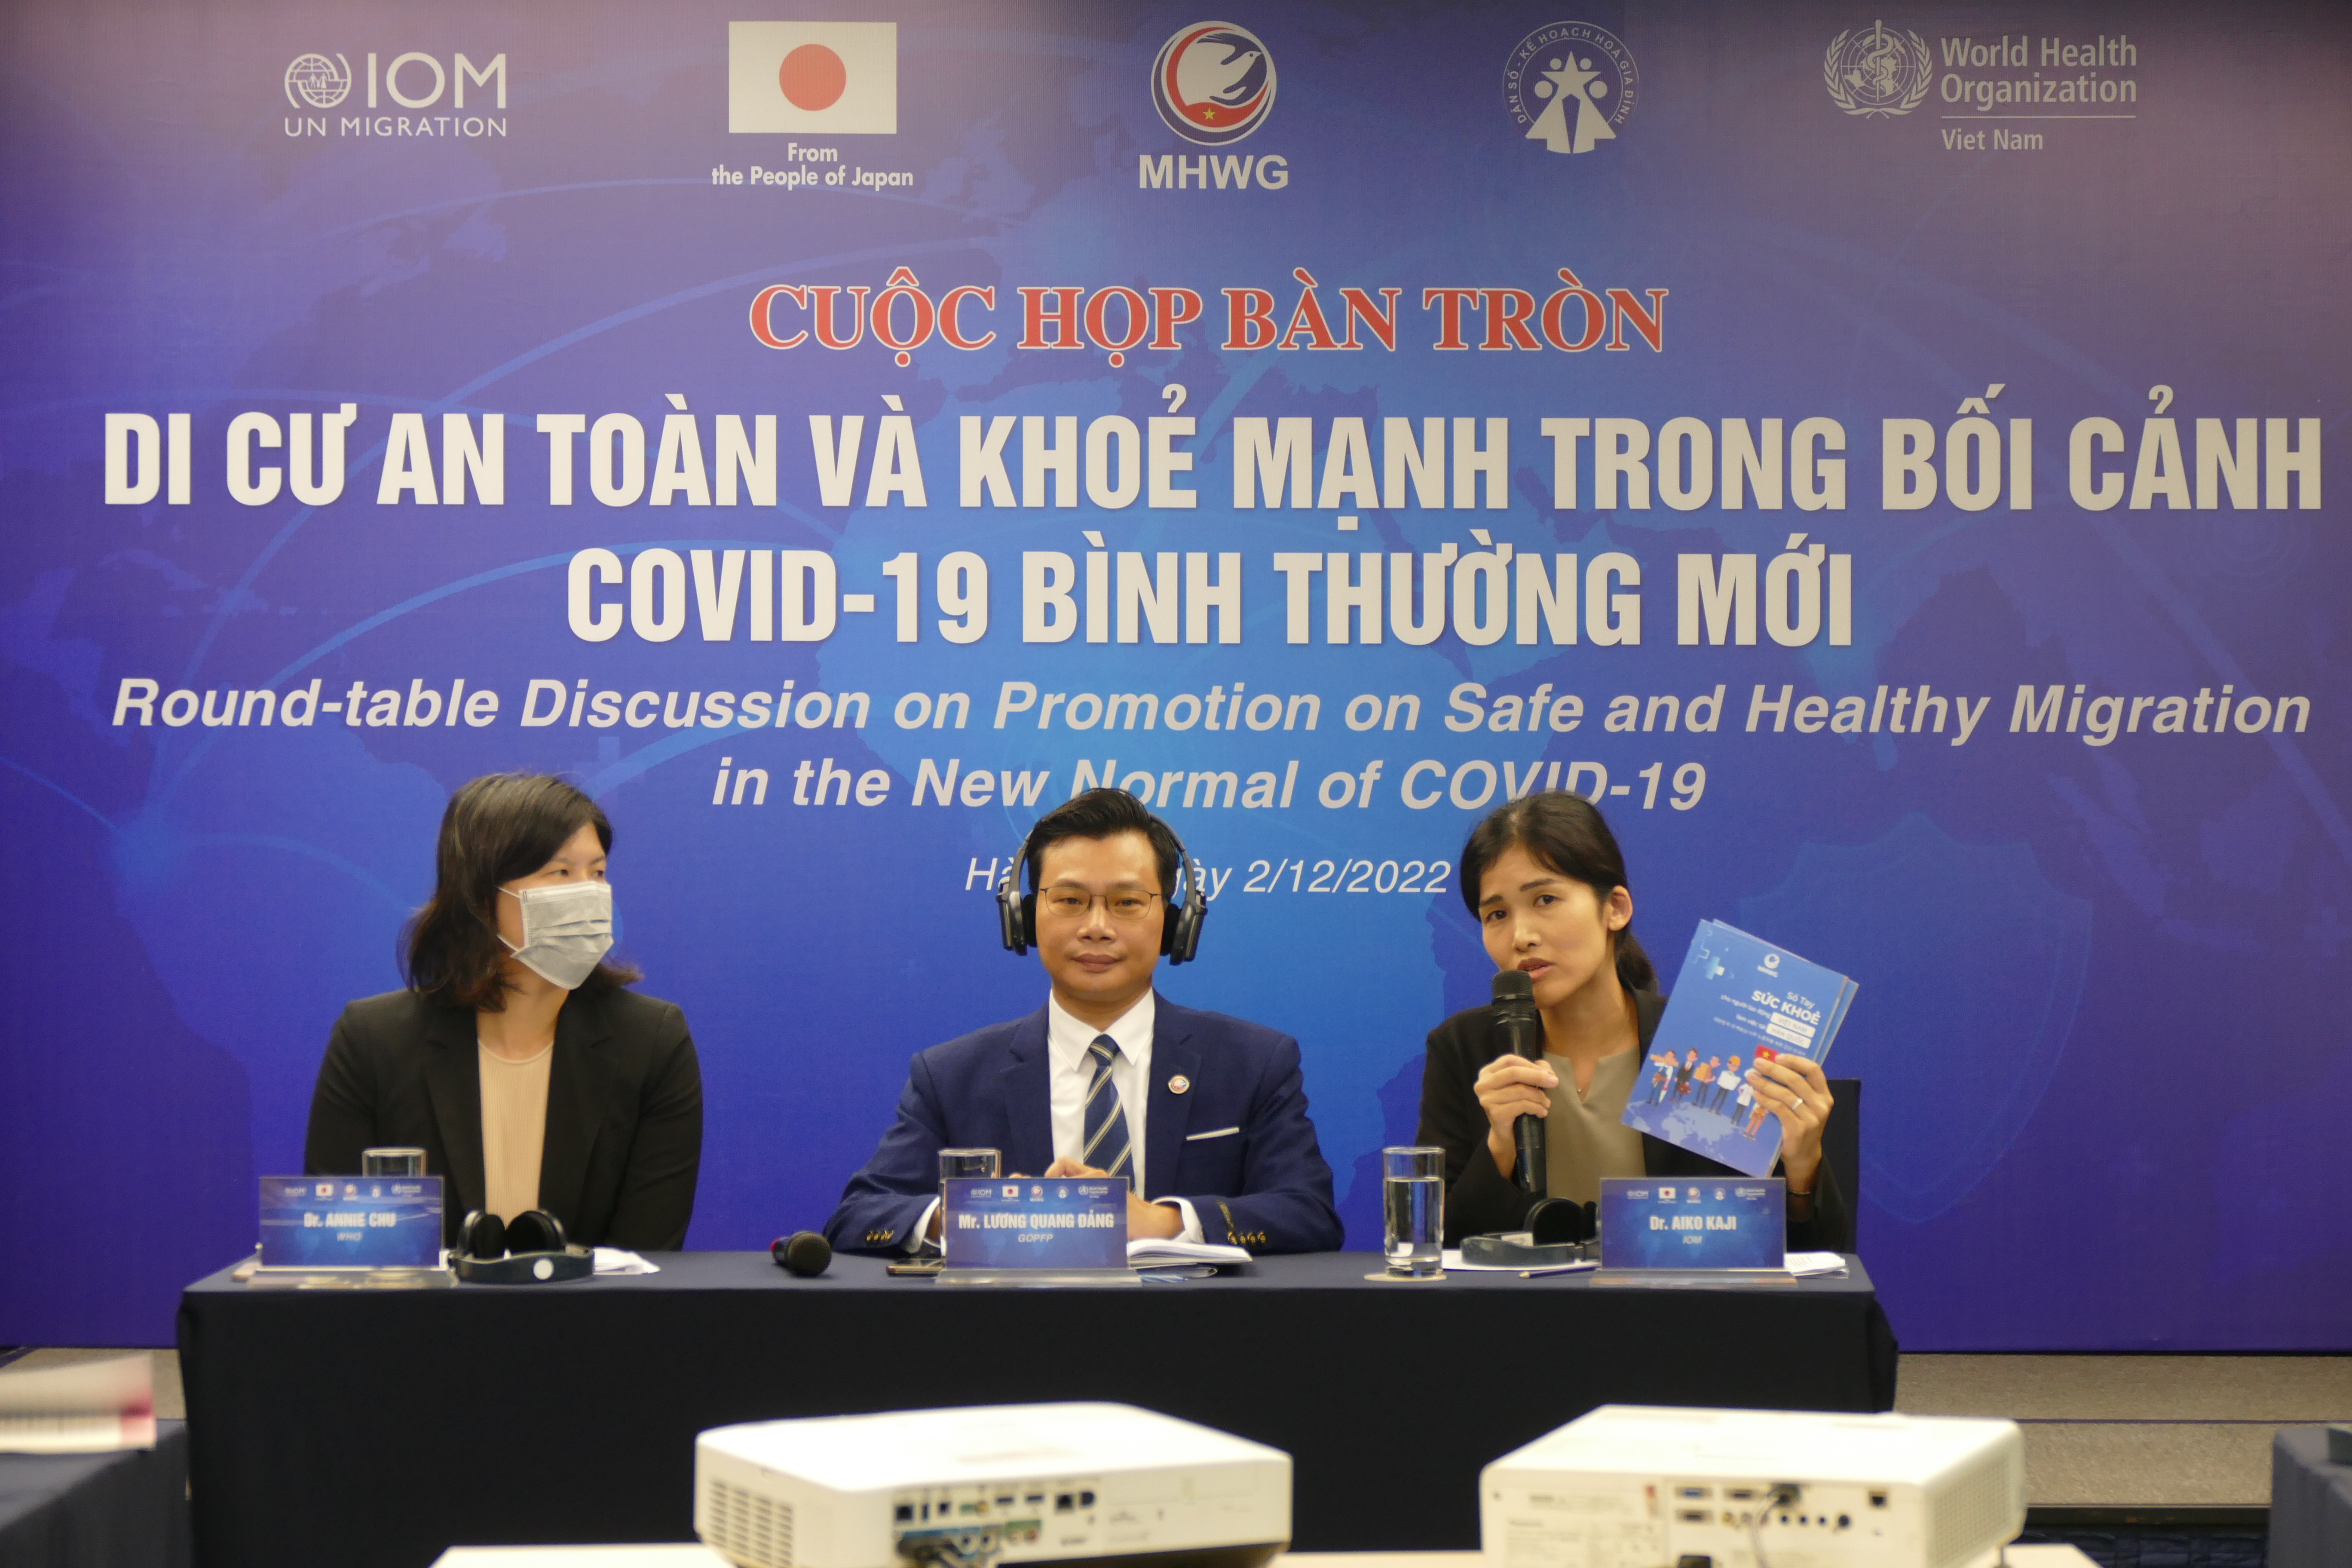 Representatives from the Ministry of Health (MOH), Ministry of Foreign Affairs (MOFA) and the Ministry of Labour, Invalids and Social Affairs (MOLISA) with the Migrant Health Working Group (MHWG) discussed today the priorities for 2023 to promote safe and healthy migration in the new normal in Viet Nam